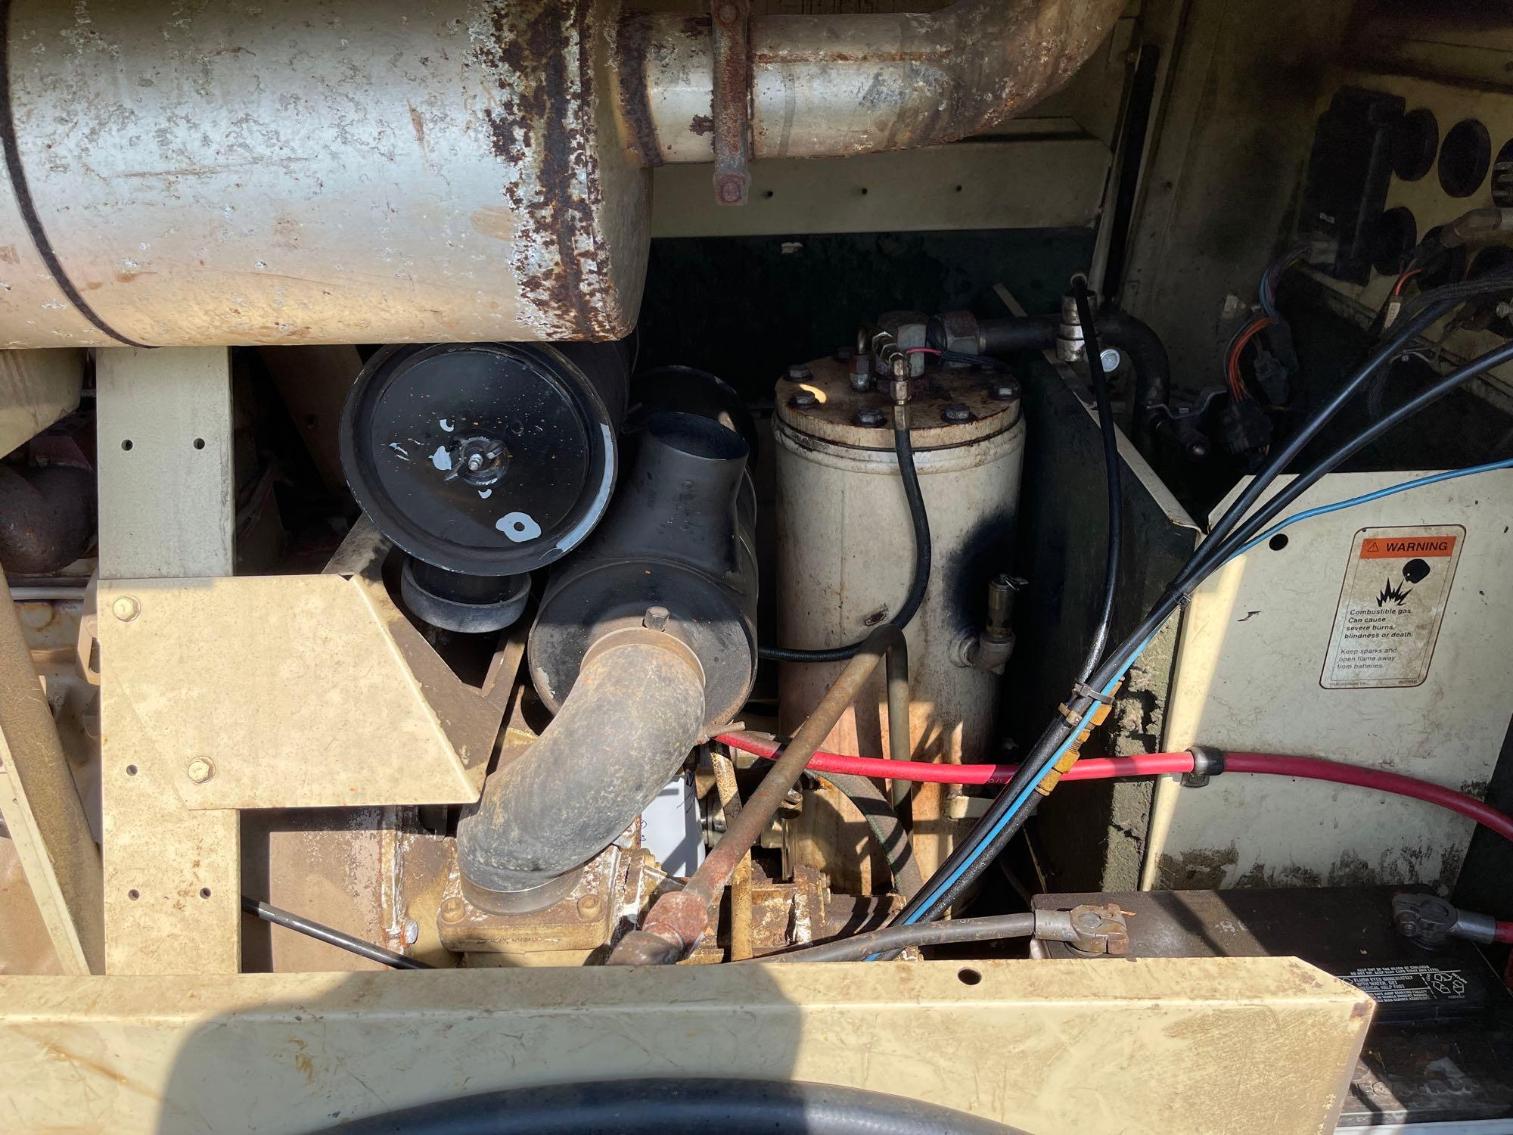 Image for Ingersoll Rand 185 Compressor 1656 hours, new tires, runs out well per seller